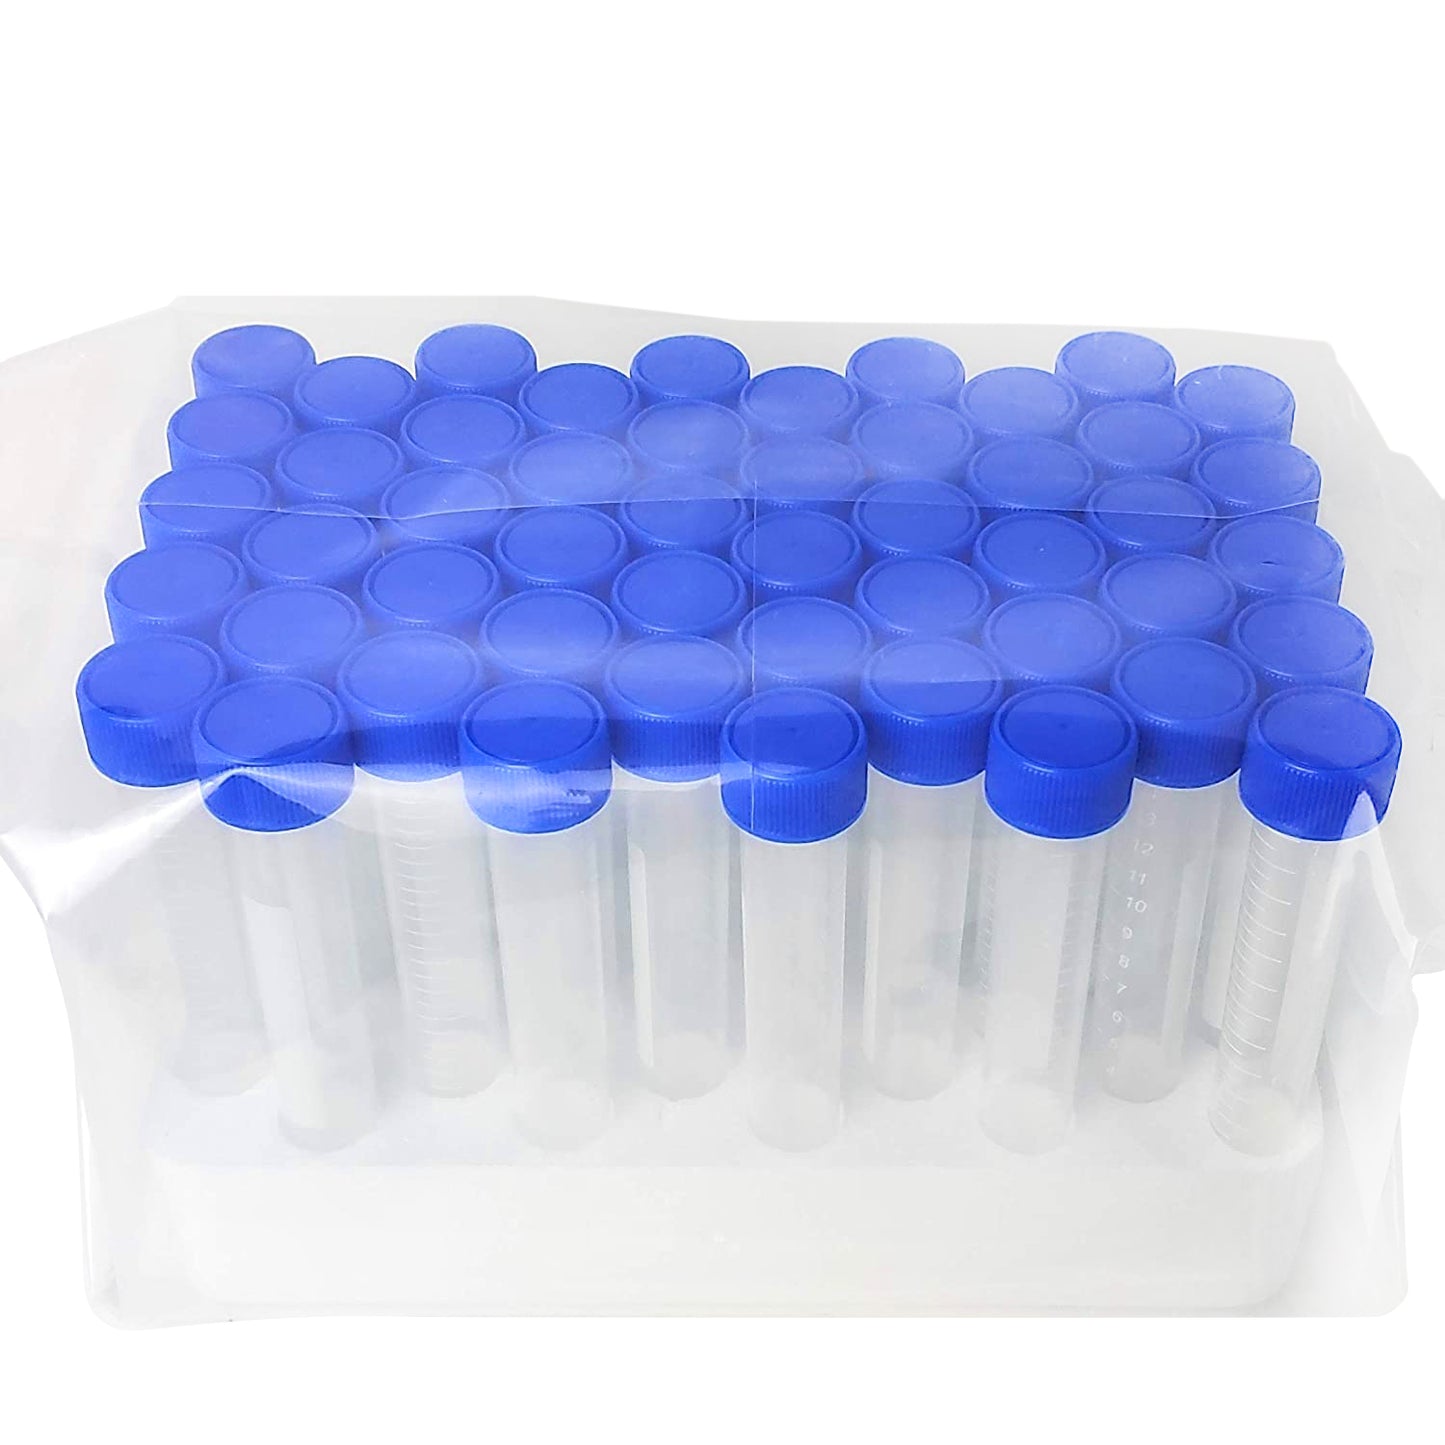 15 ml Conical Centrifuge Tube, Sterile, Rack Packed (Case of 500)